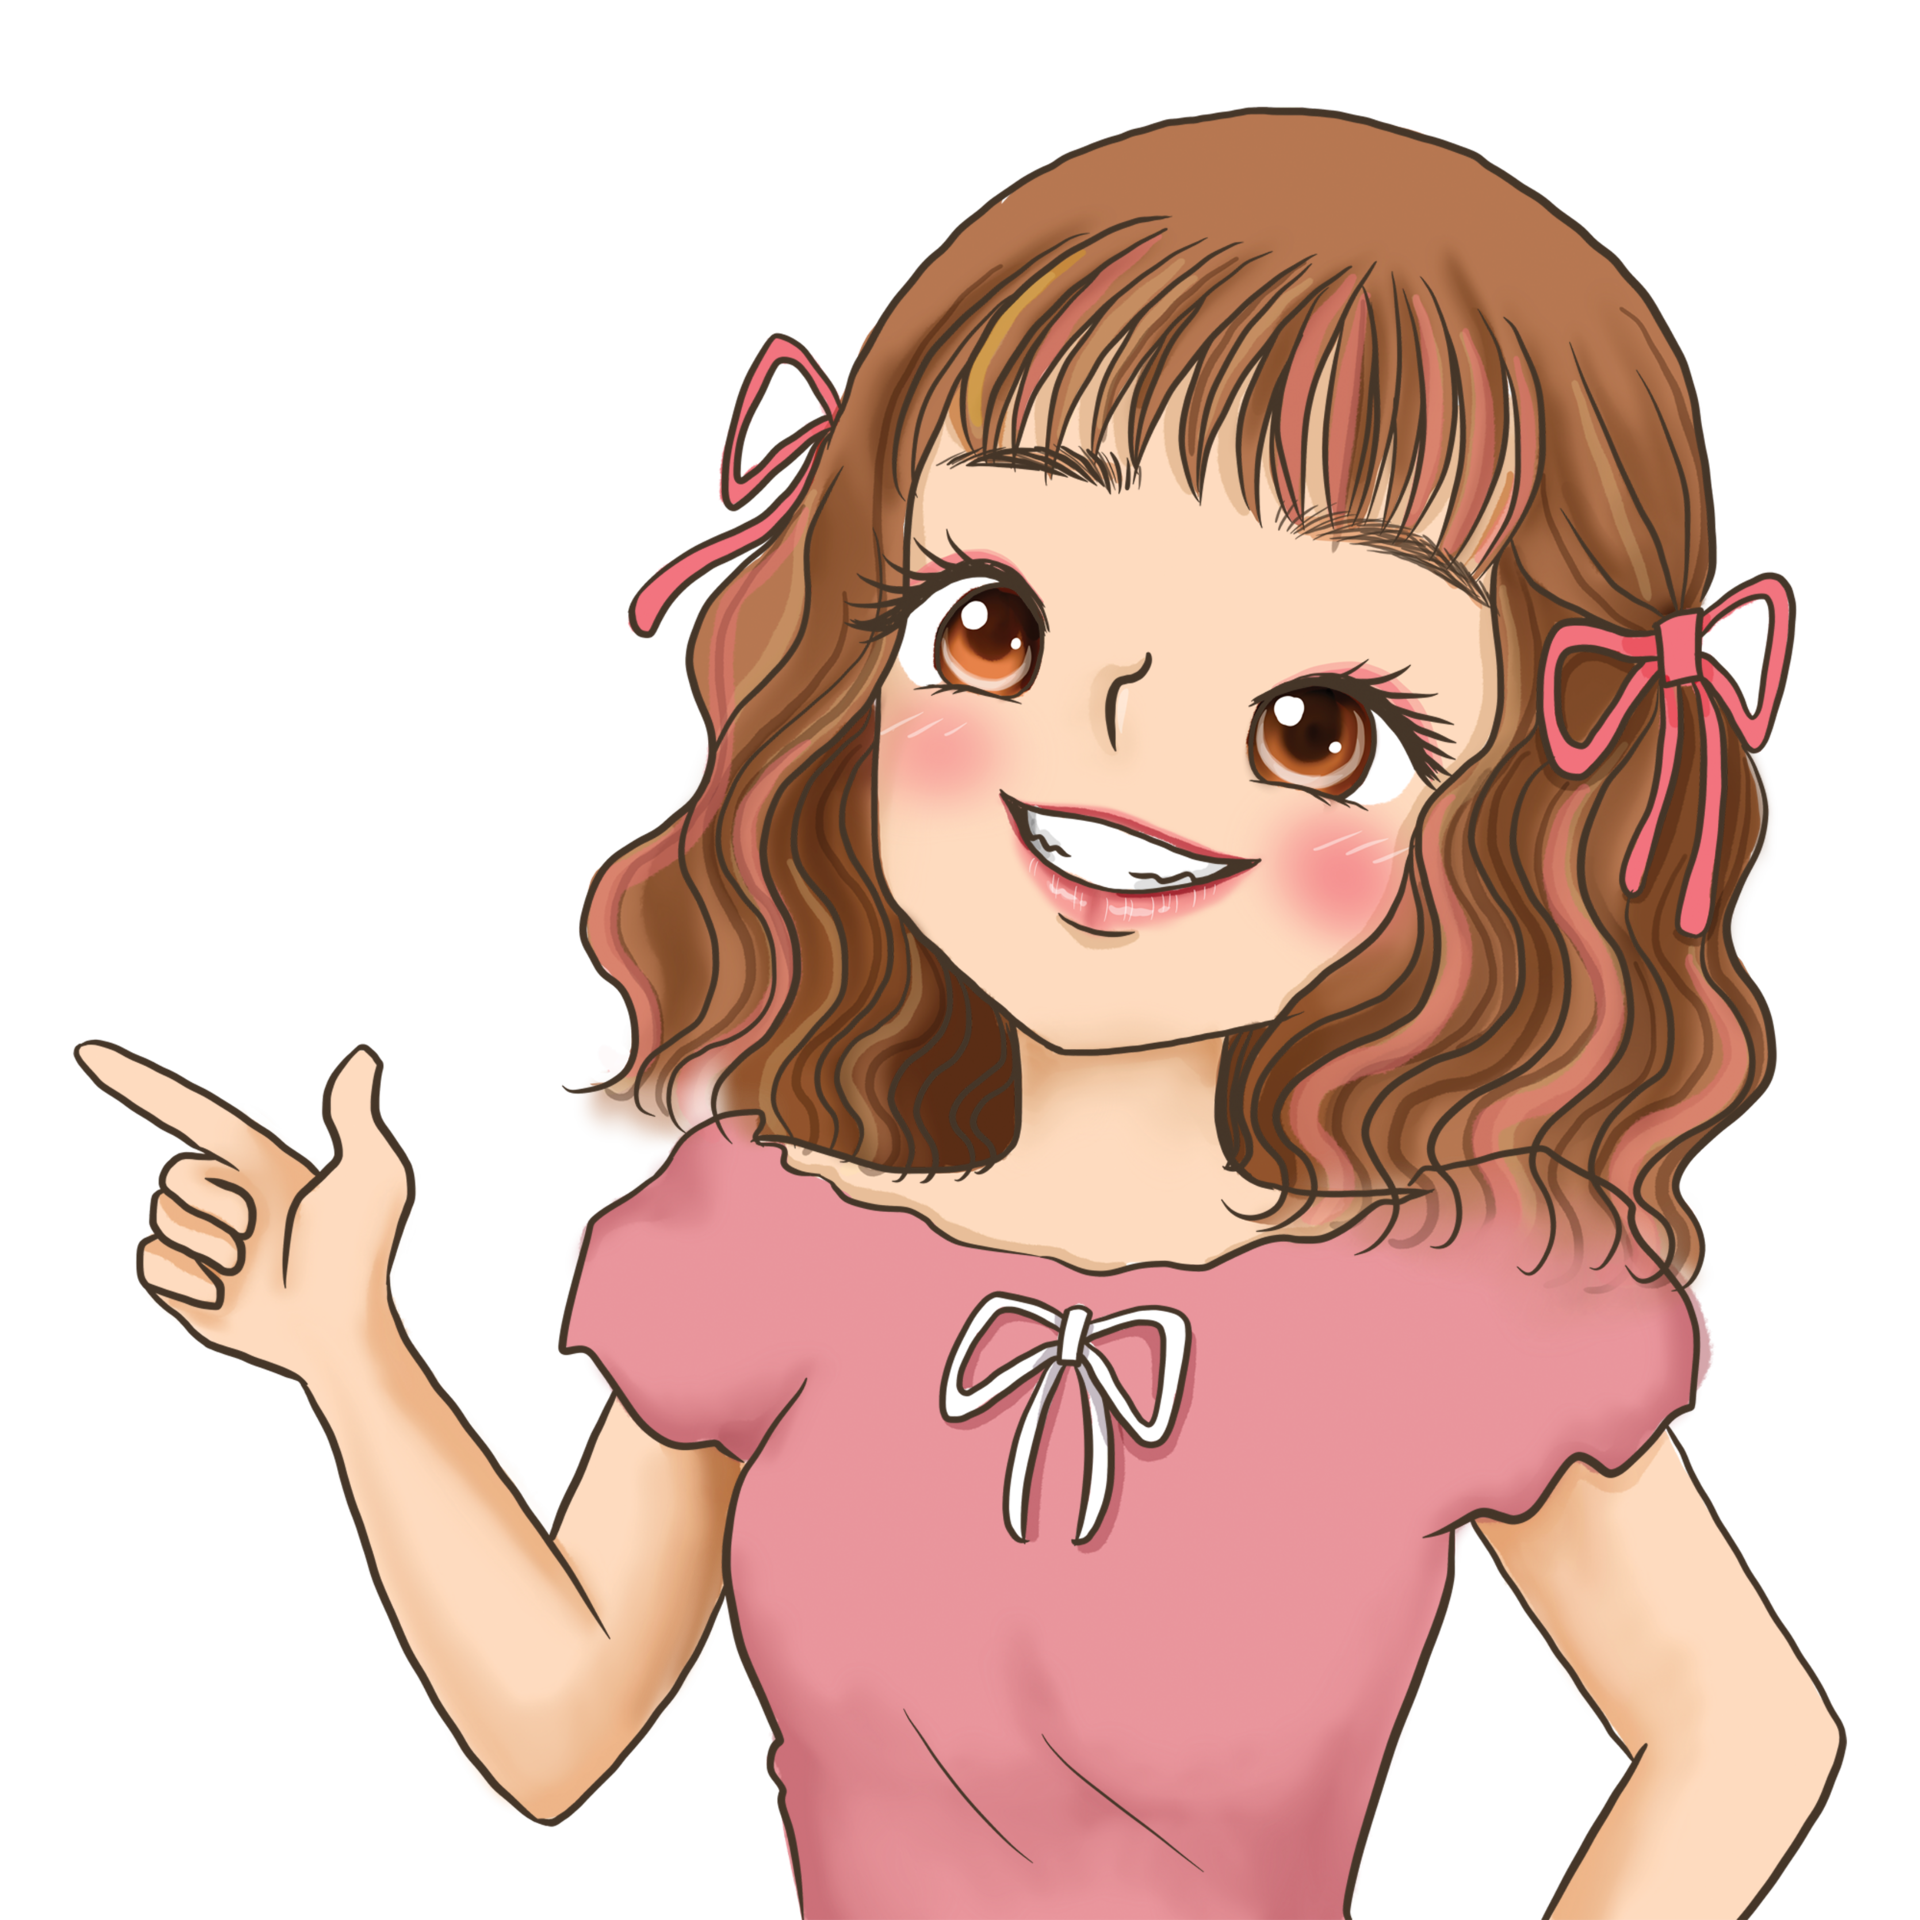 Free girl Anime Cute Character Cartoon Emotion Illustration, ClipArt  Drawing Kawai Manga Design Art 8470176 PNG with Transparent Background